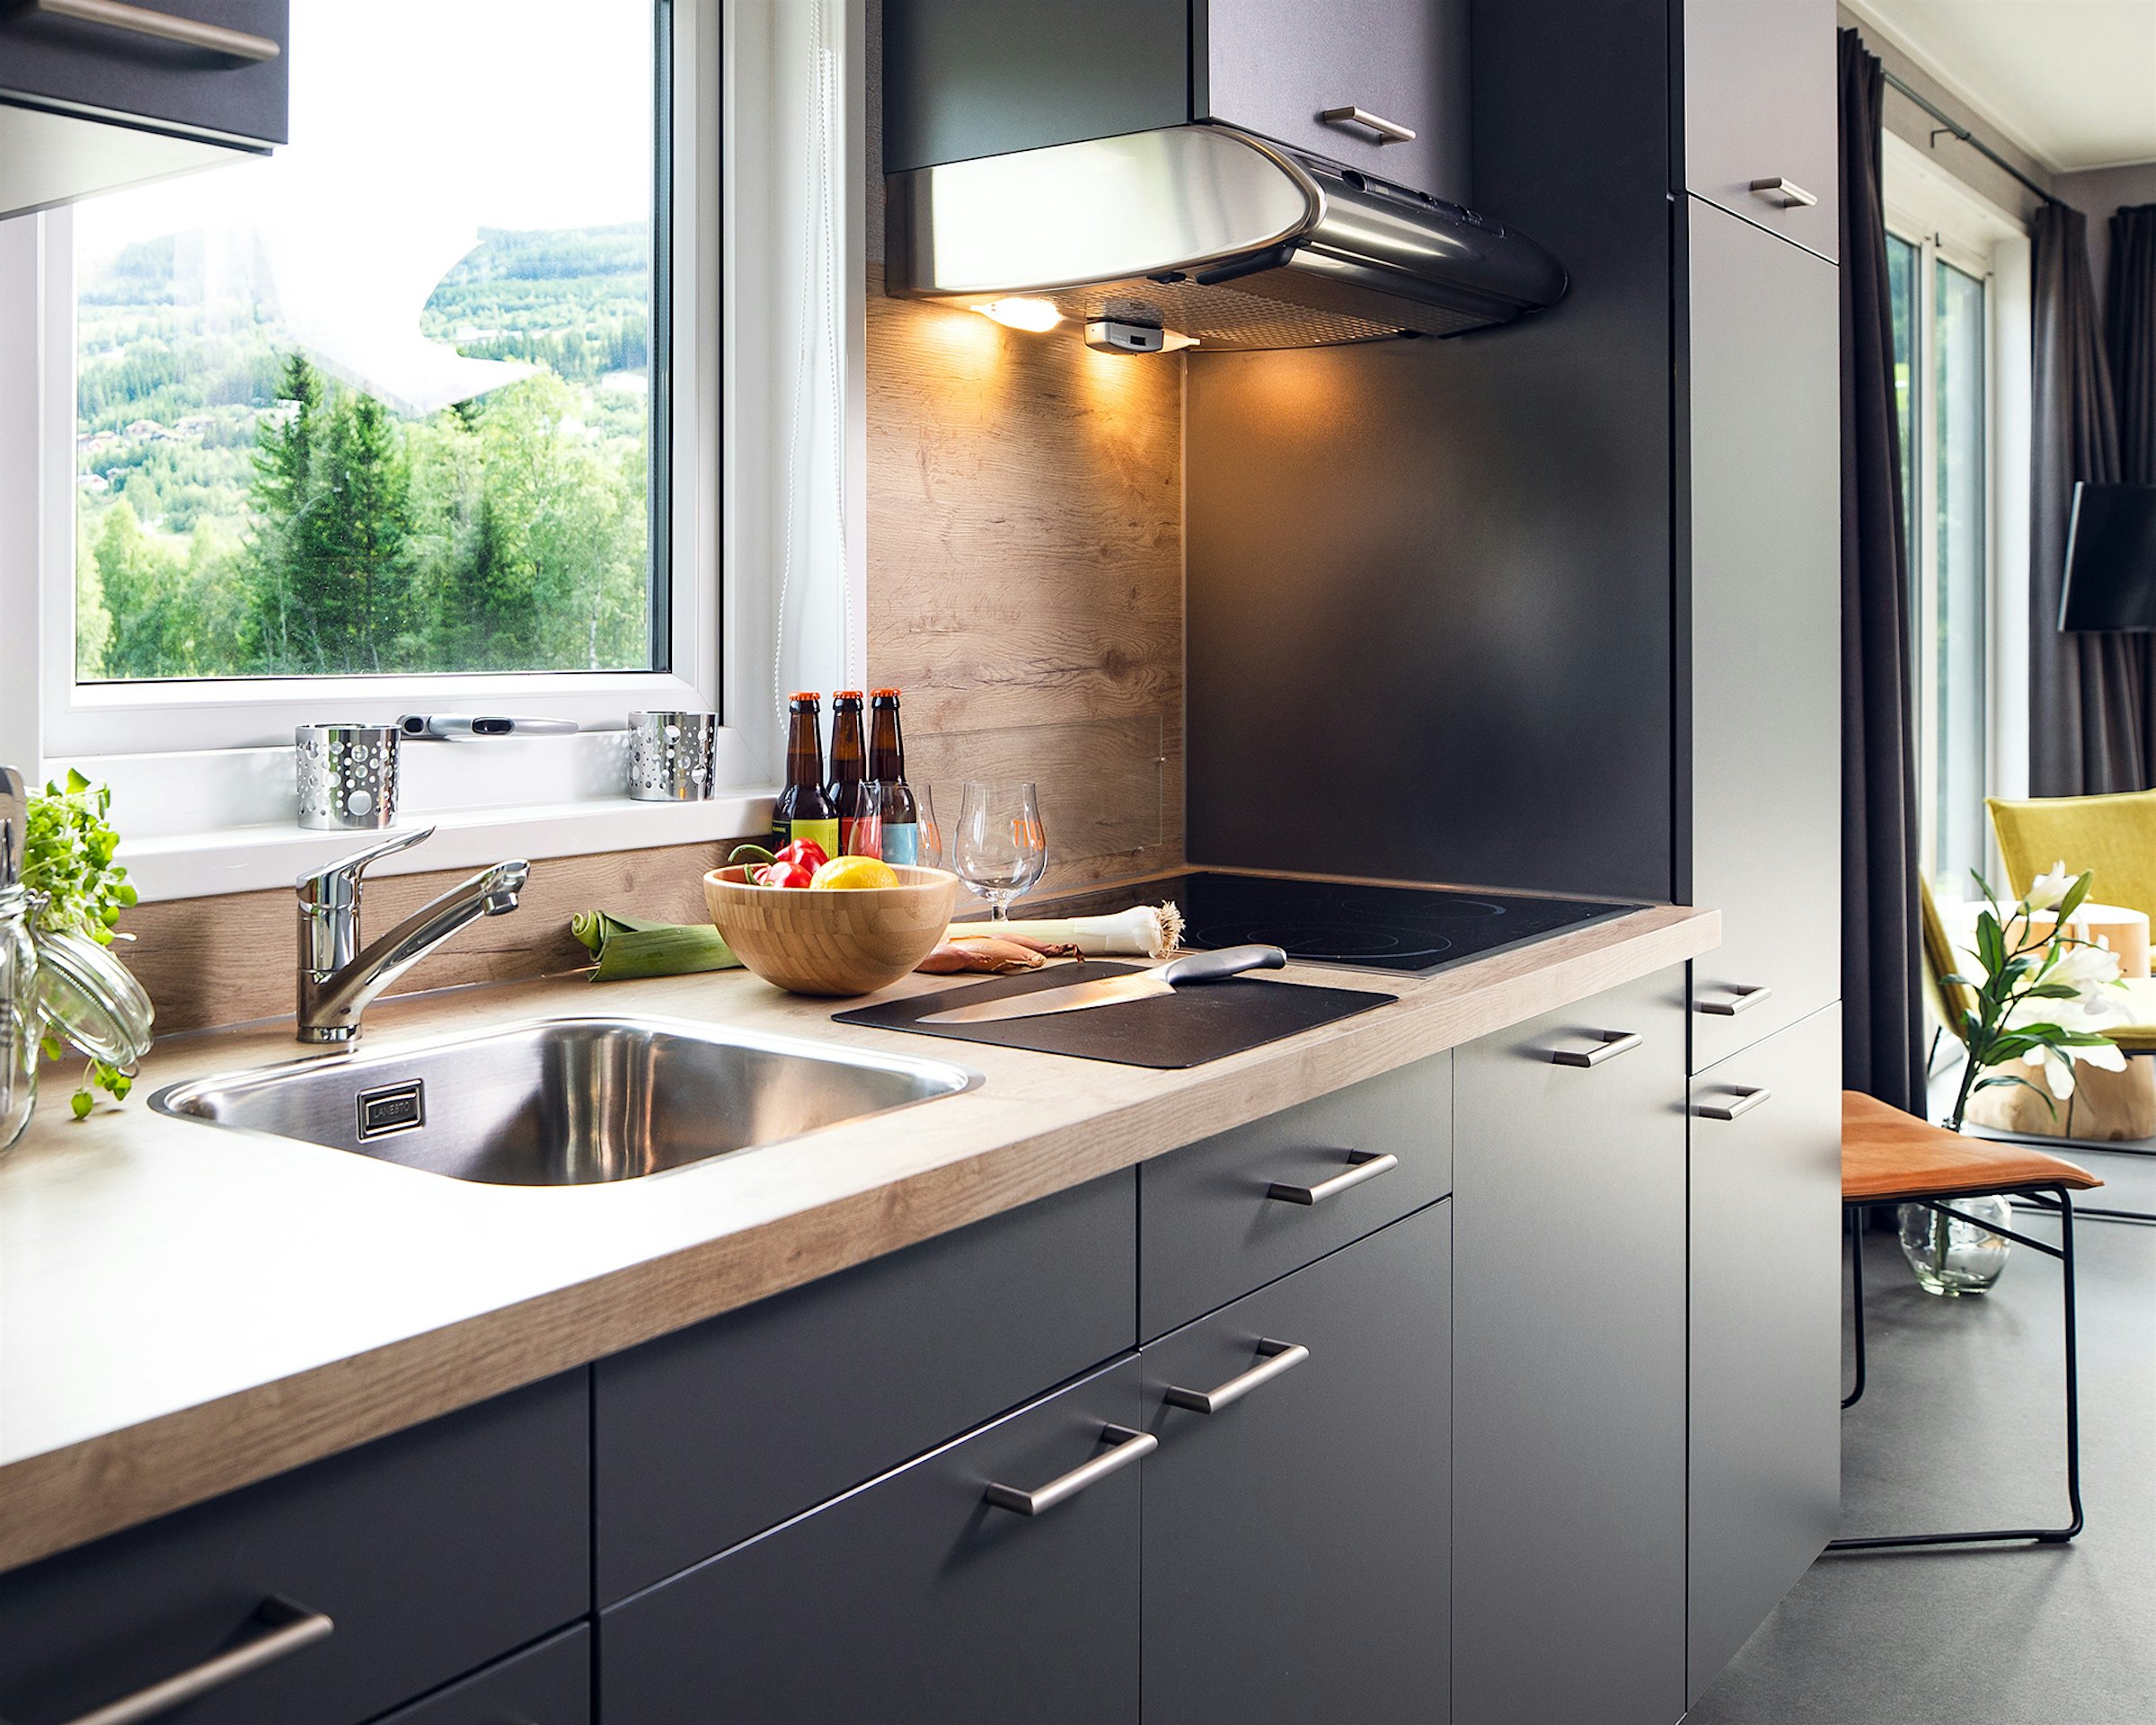 Bright, modern kitchen with wooden worktop and black fronts. Photo